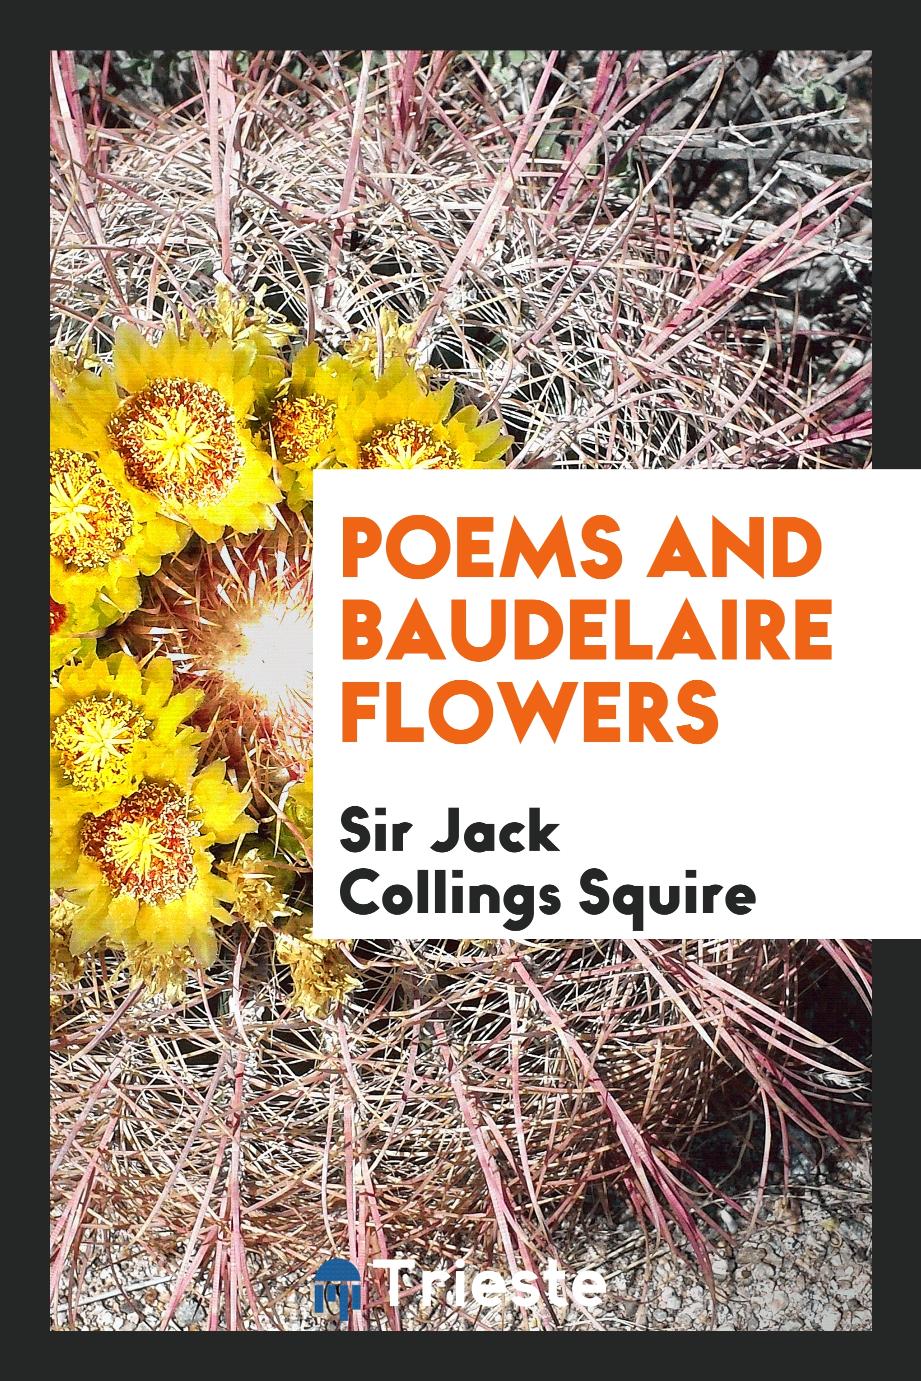 Poems and Baudelaire flowers